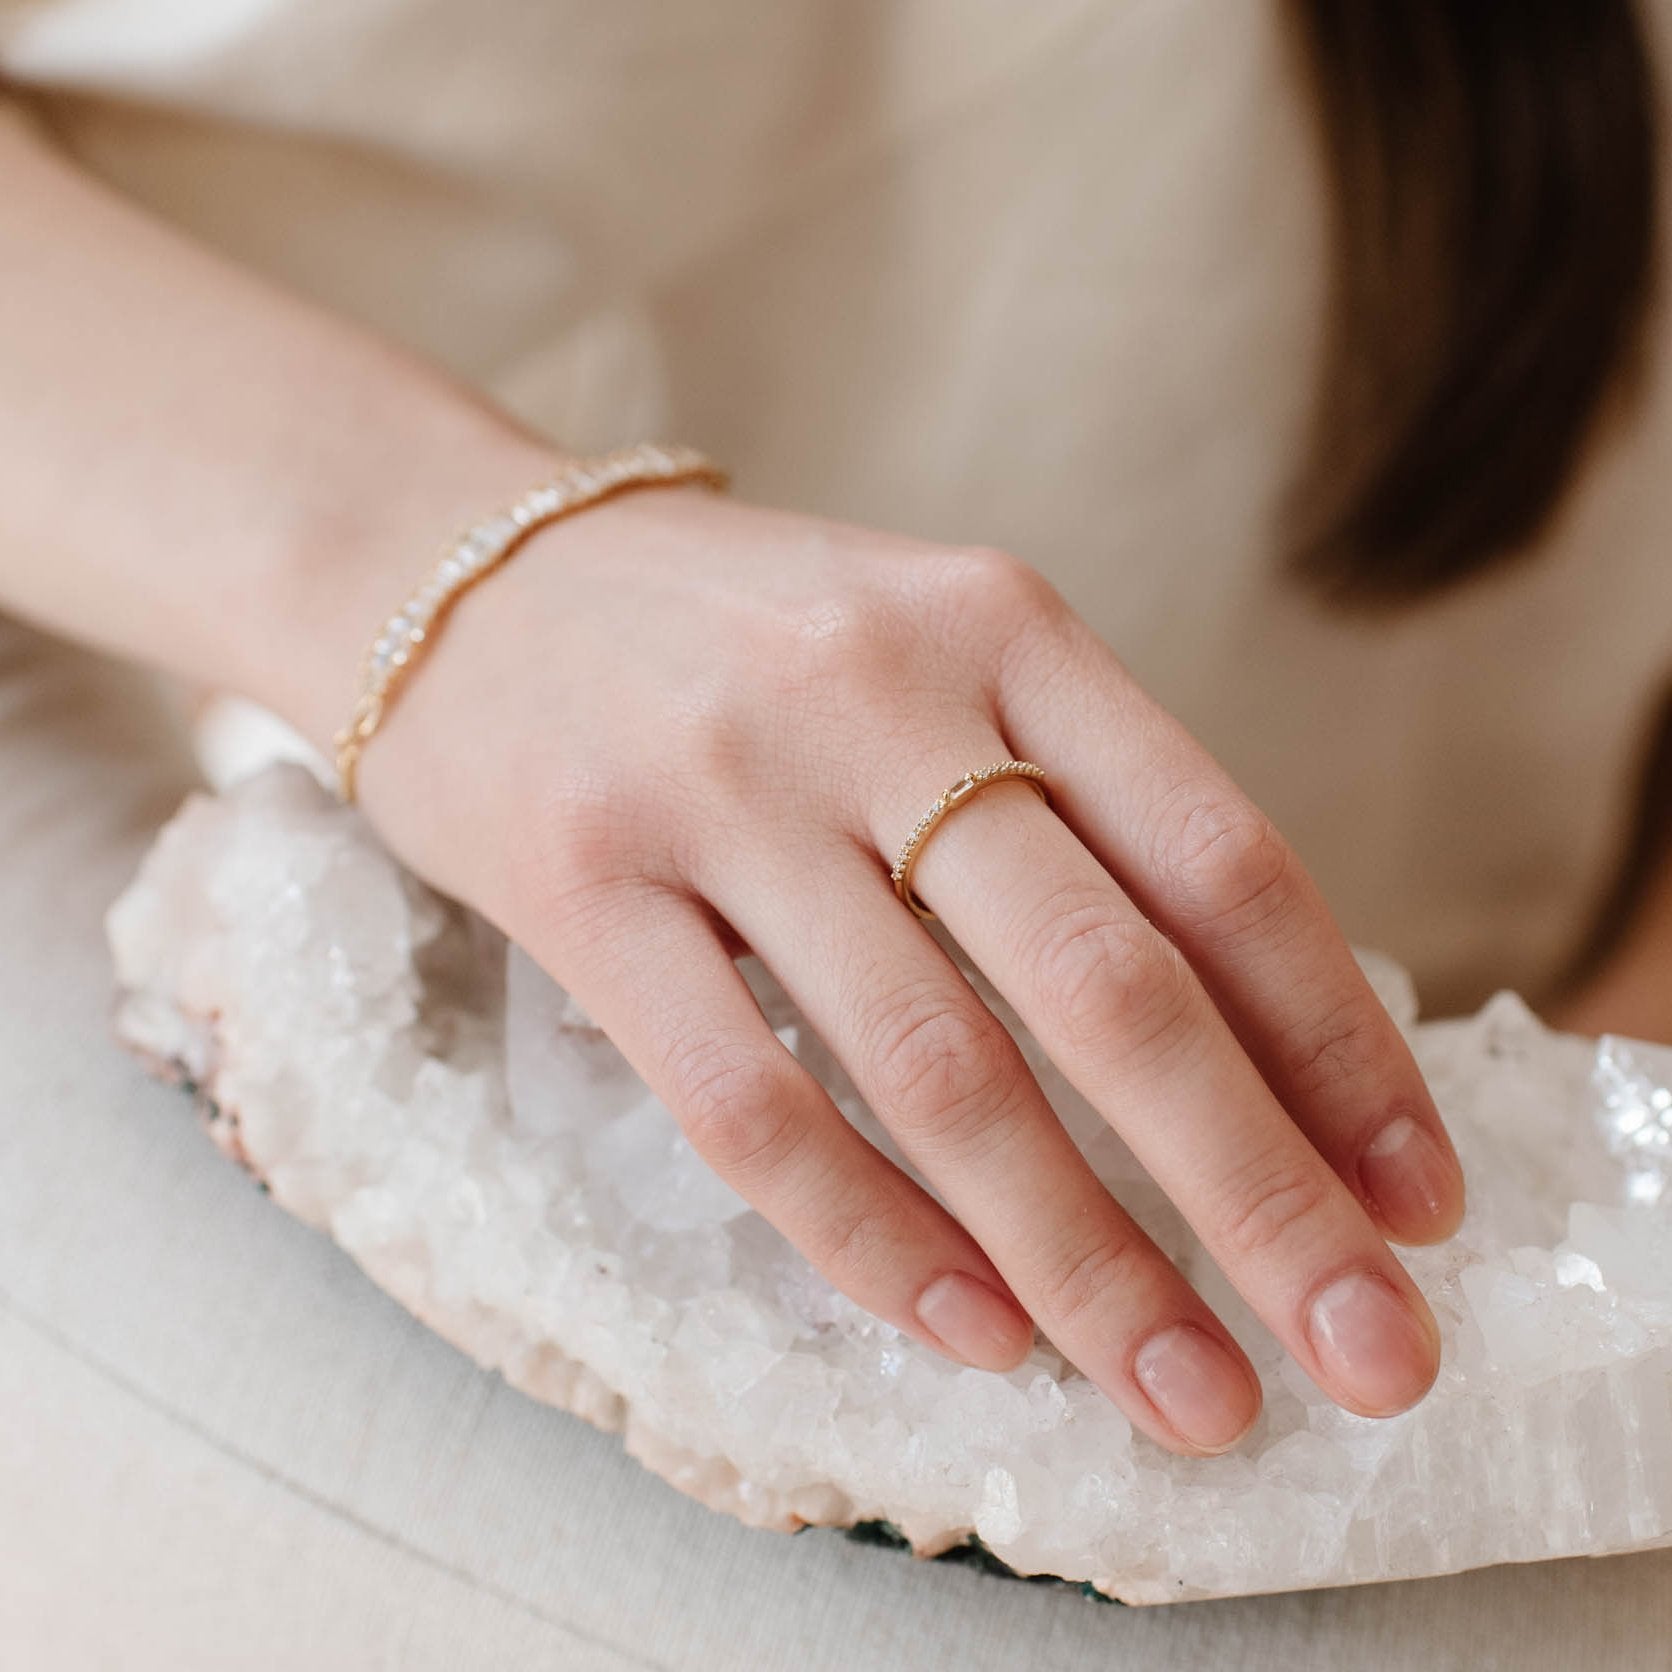 Loyal Prism Stacking Ring - White Topaz & Gold - SO PRETTY CARA COTTER